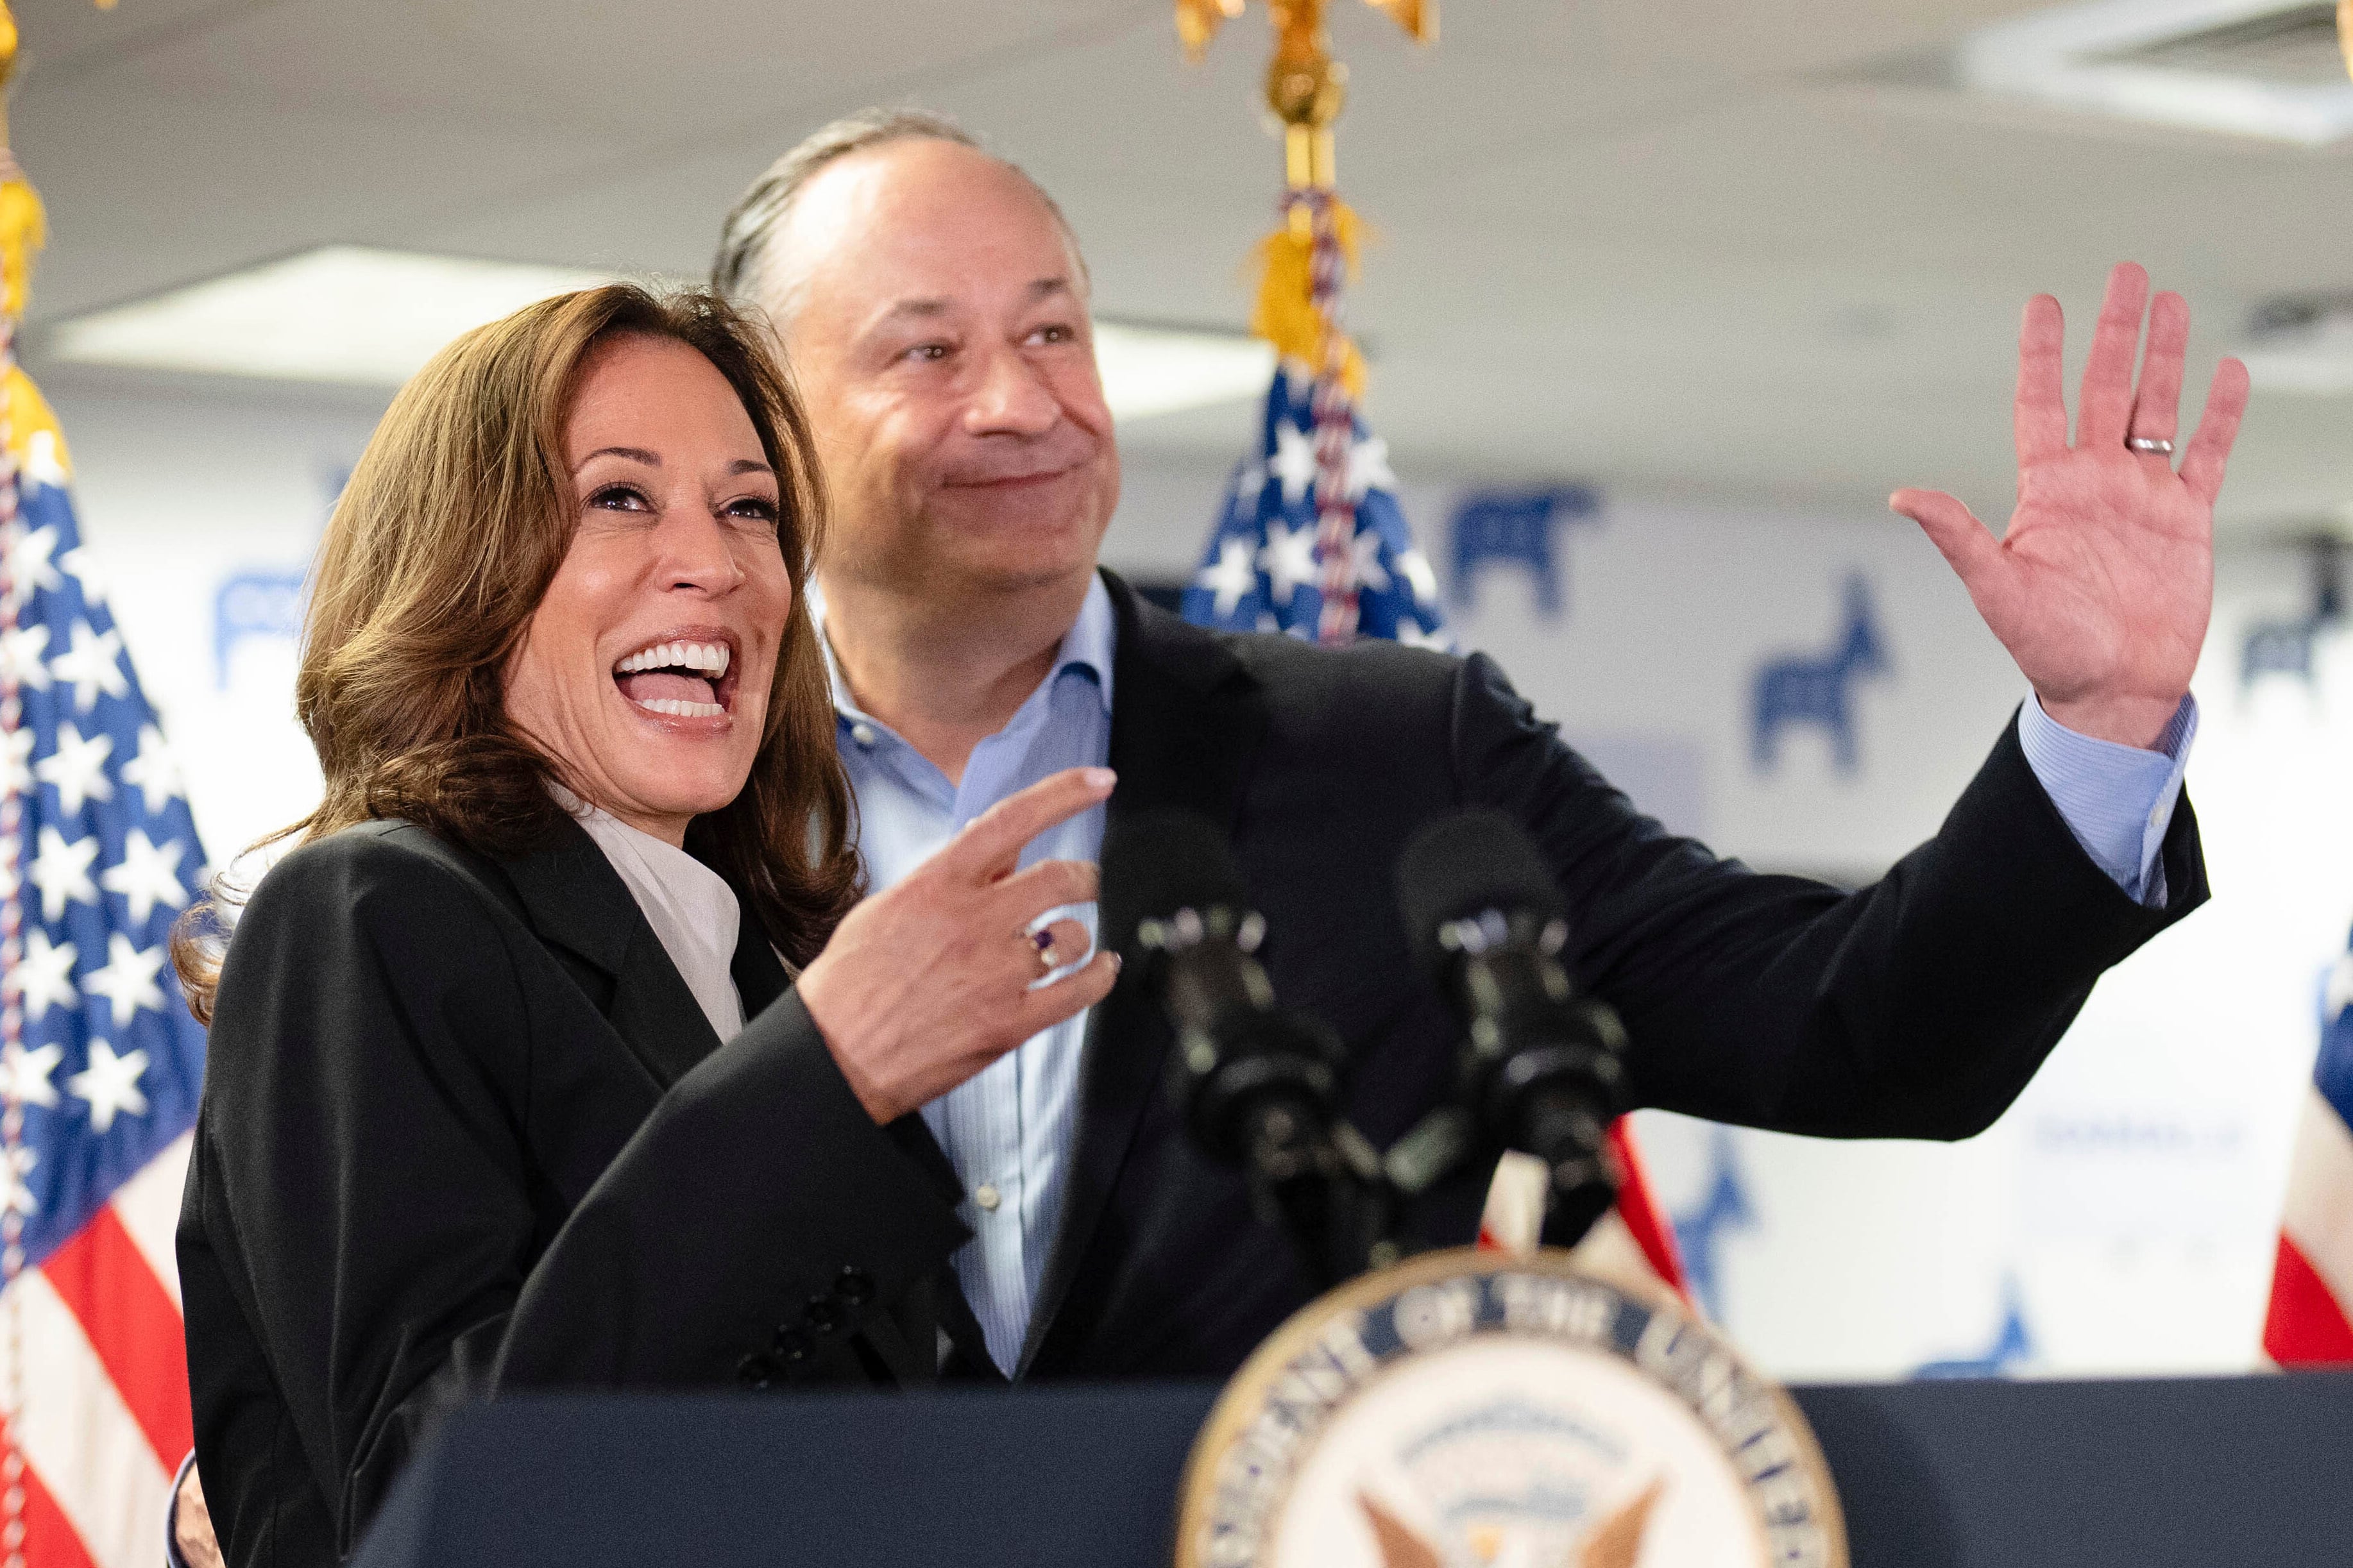 Harris visits battleground Wisconsin in first rally as Democrats coalesce around her for president